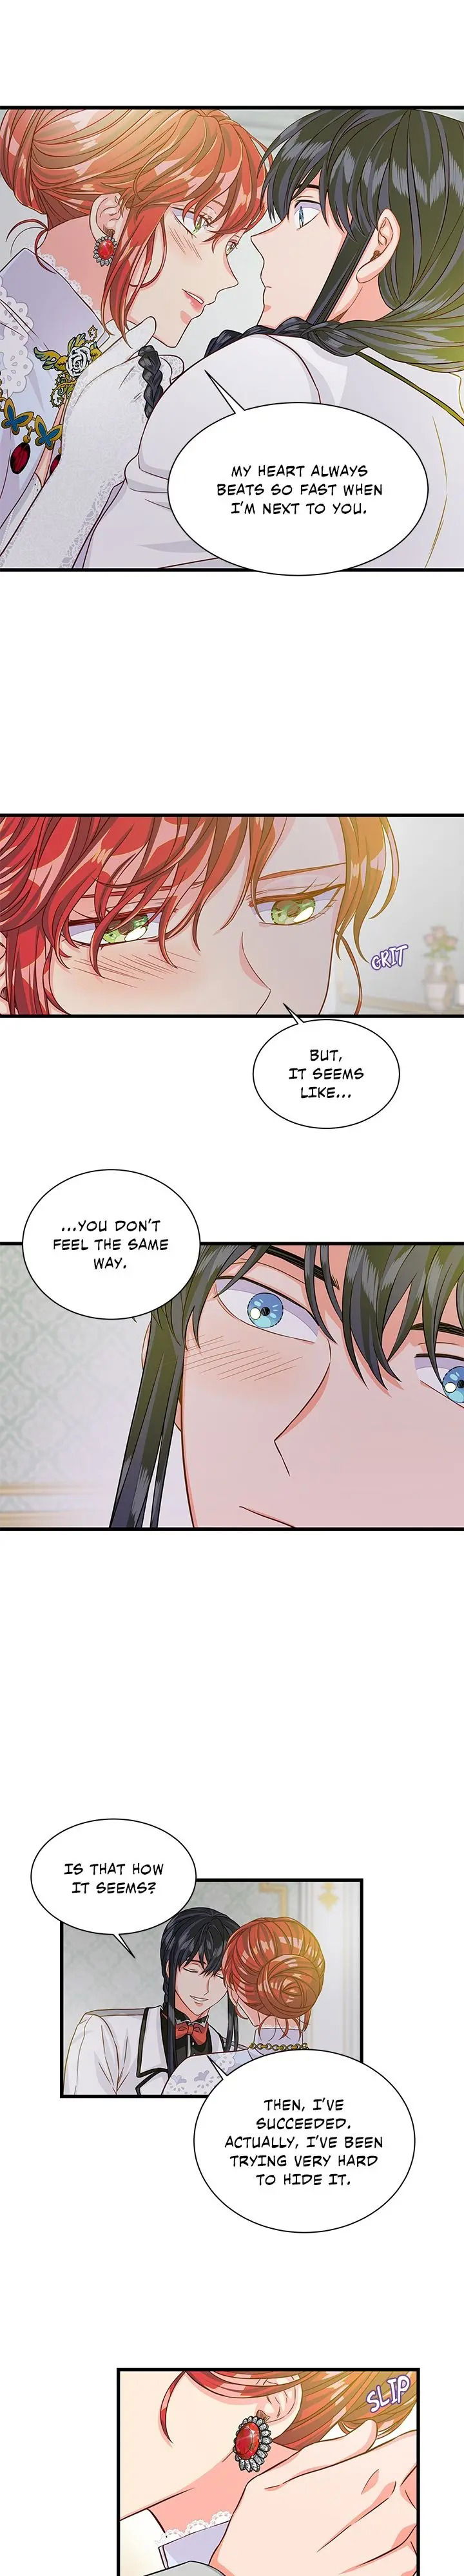 Priscilla's Marriage Request Chapter 45 page 4